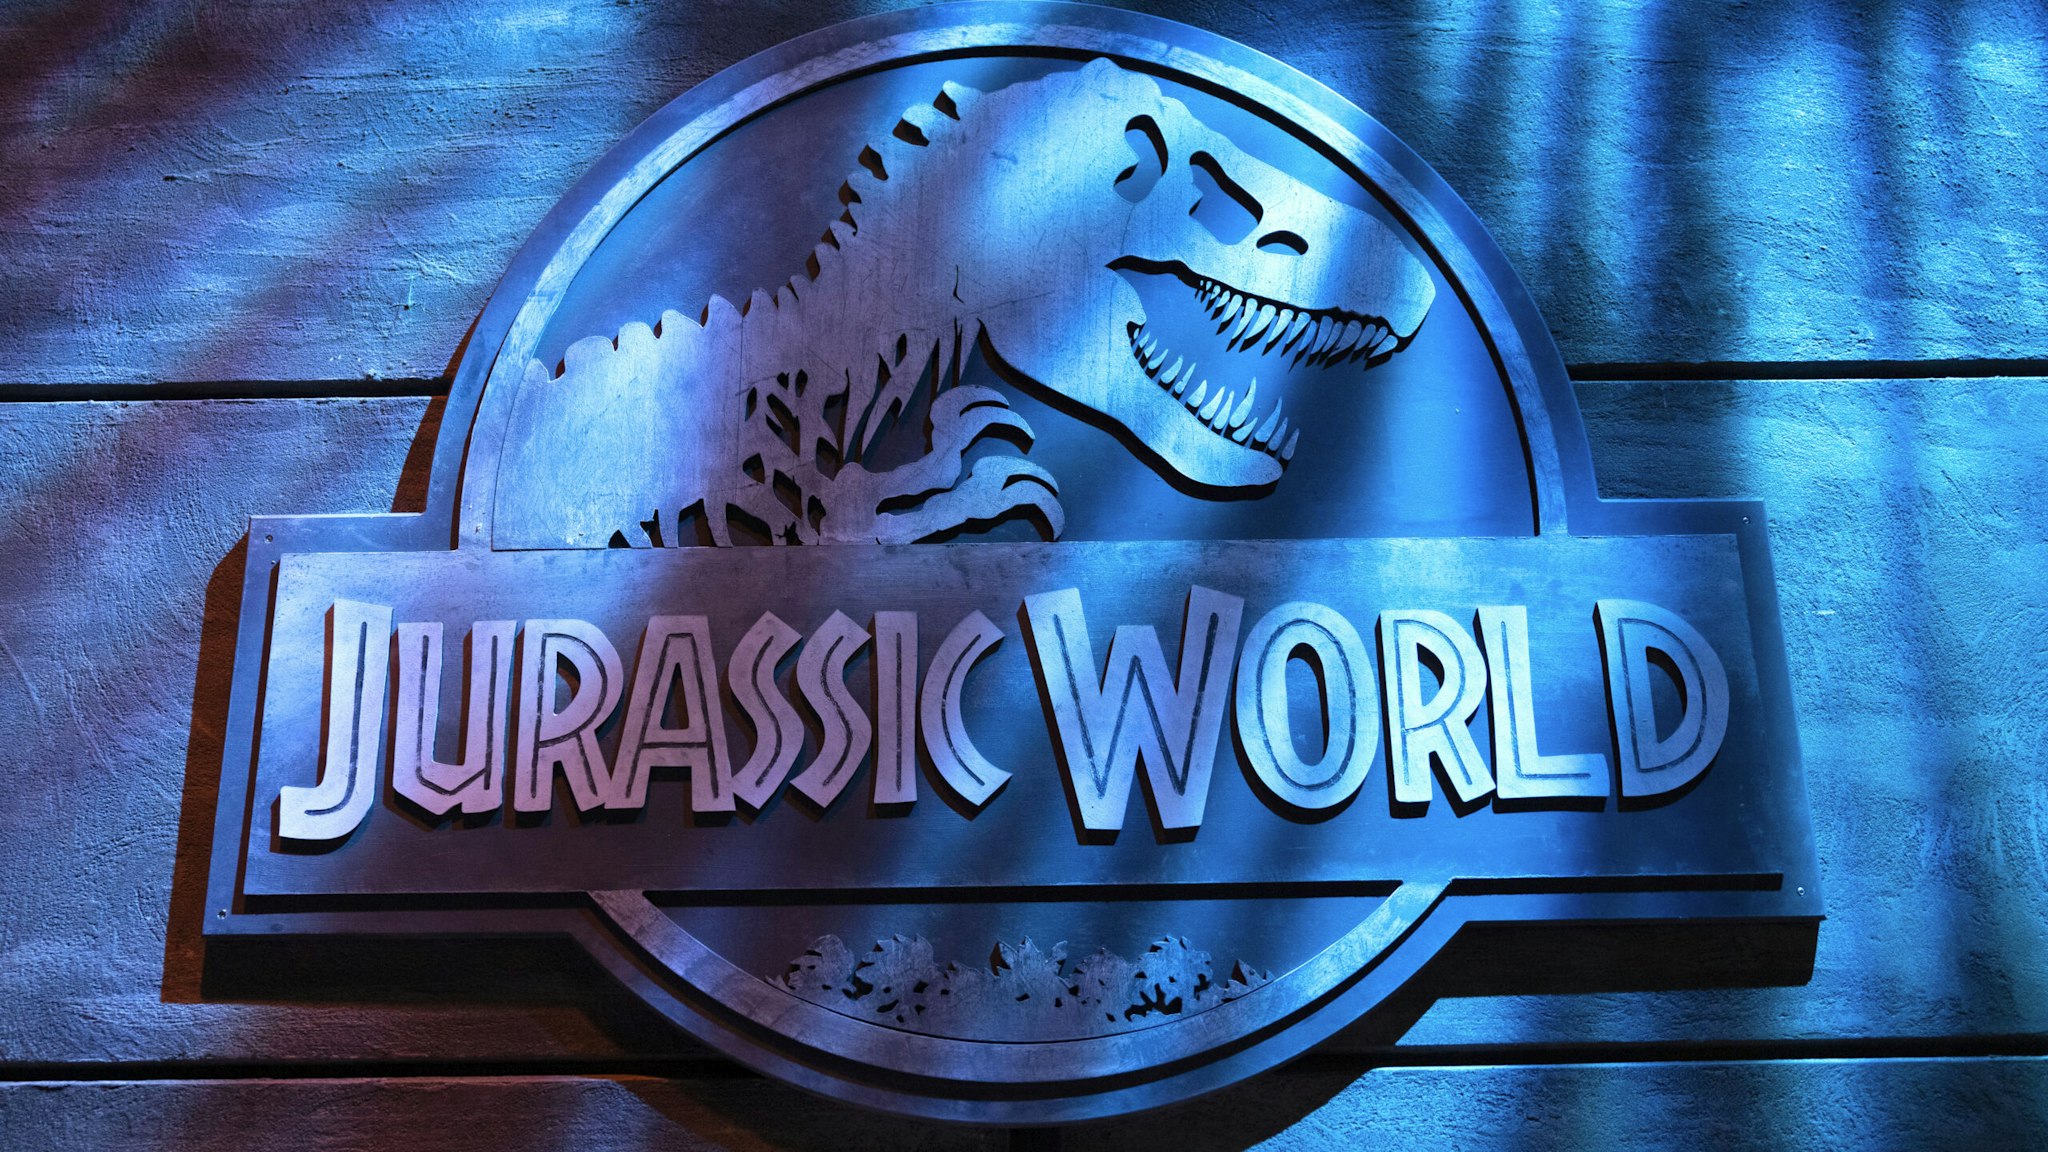 30 March 2023, North Rhine-Westphalia, Cologne: The logo of the exhibition can be seen in the exhibition "Jurassic World: The Exhibition" at the Odysseum.